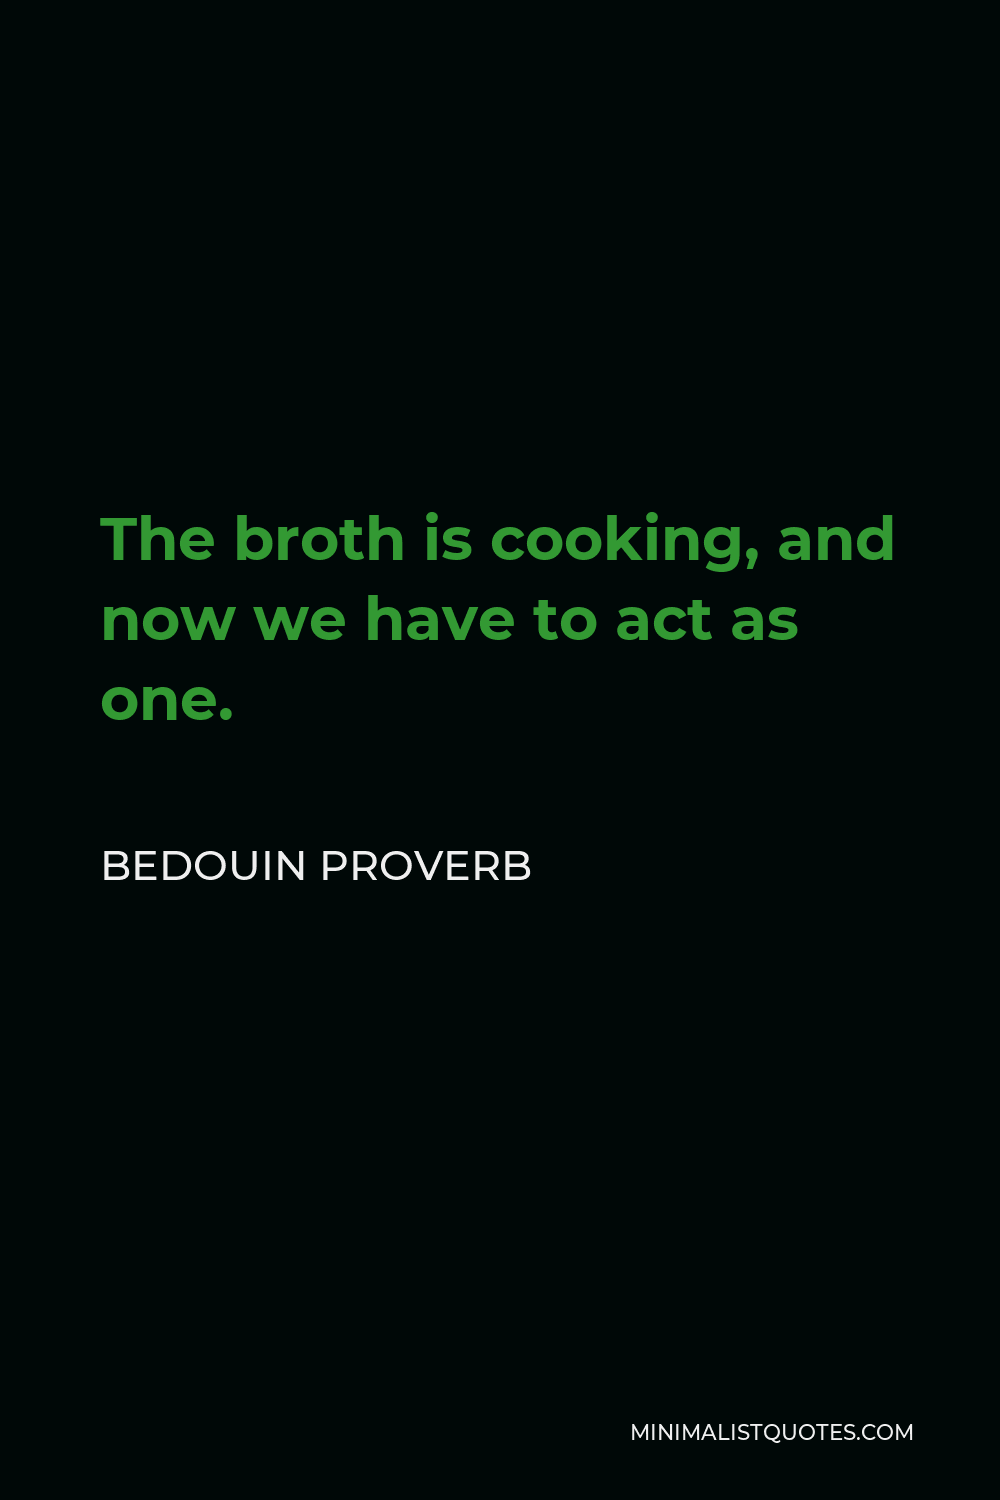 Bedouin Proverb Quote - The broth is cooking, and now we have to act as one.